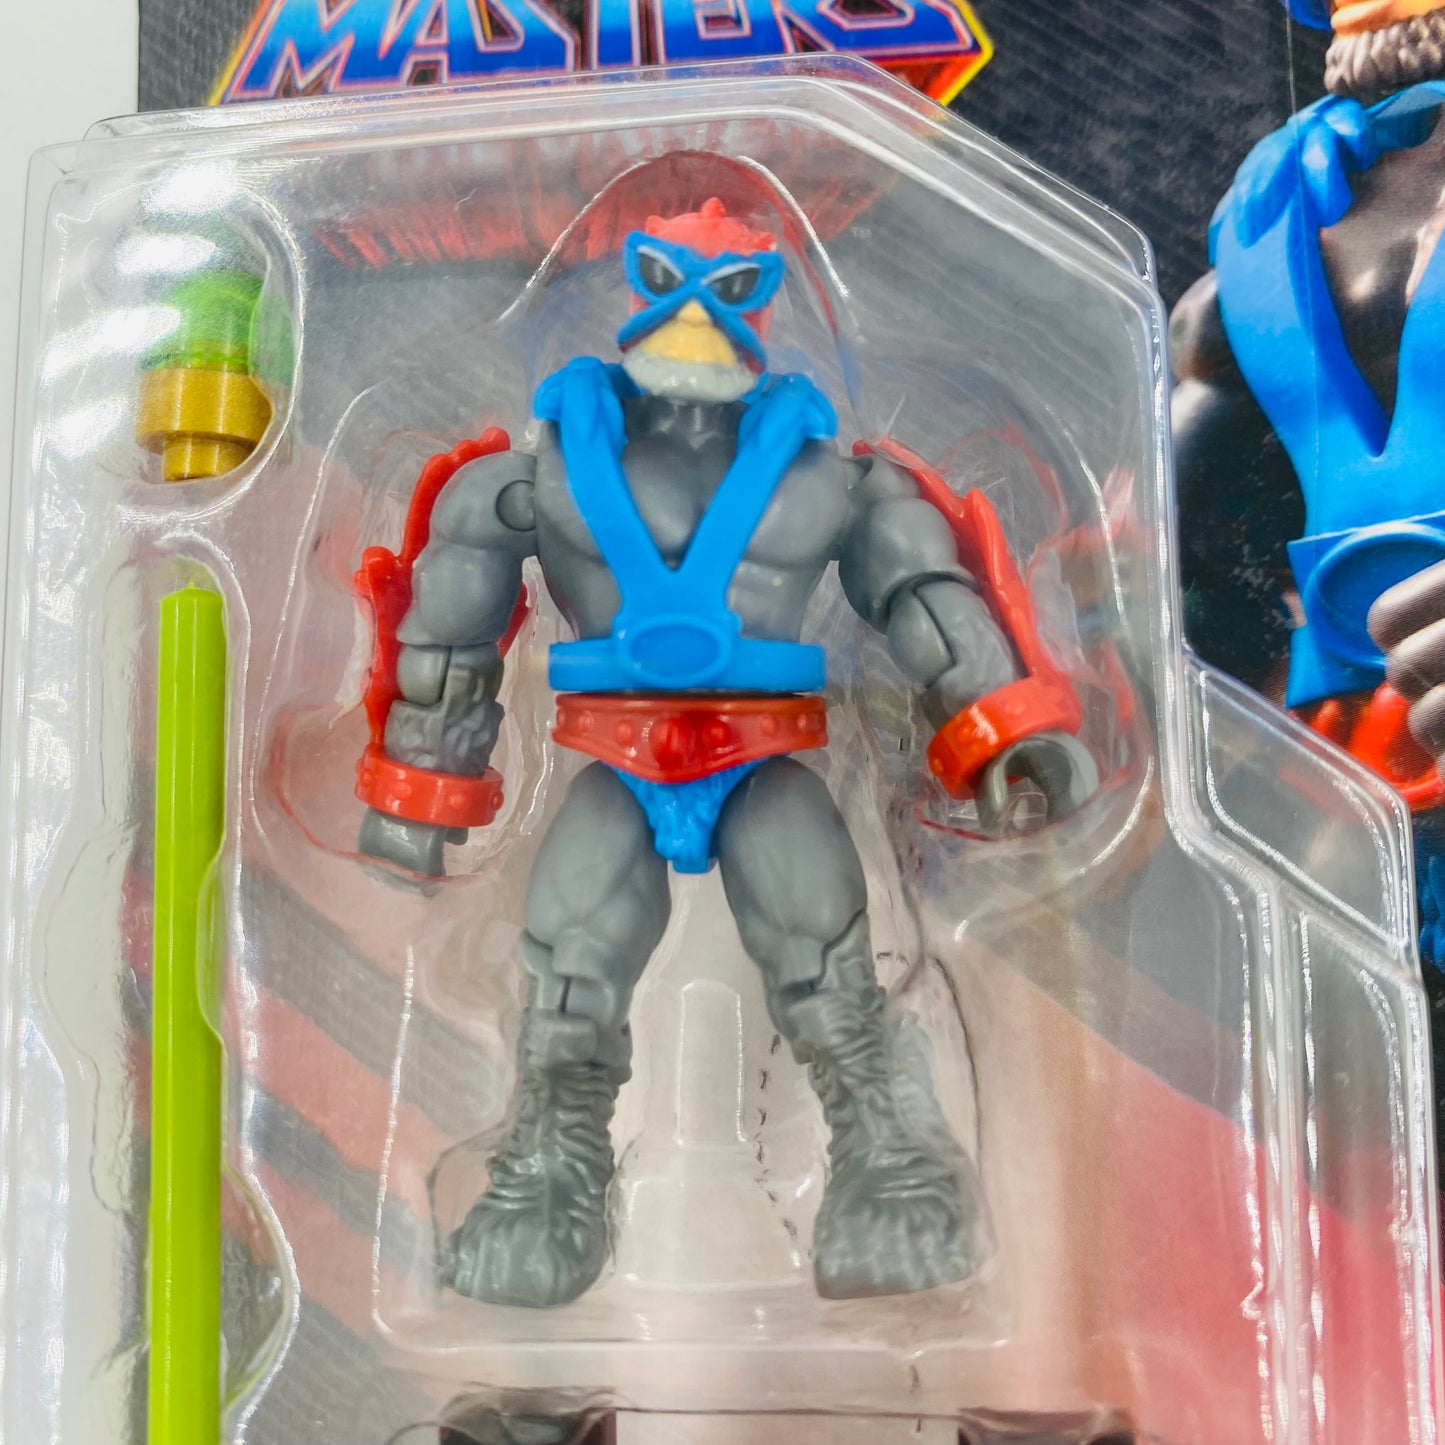 Mega Construx Masters of the Universe Stratos carded 2” micro action figure (2019) GCP70 Mattel